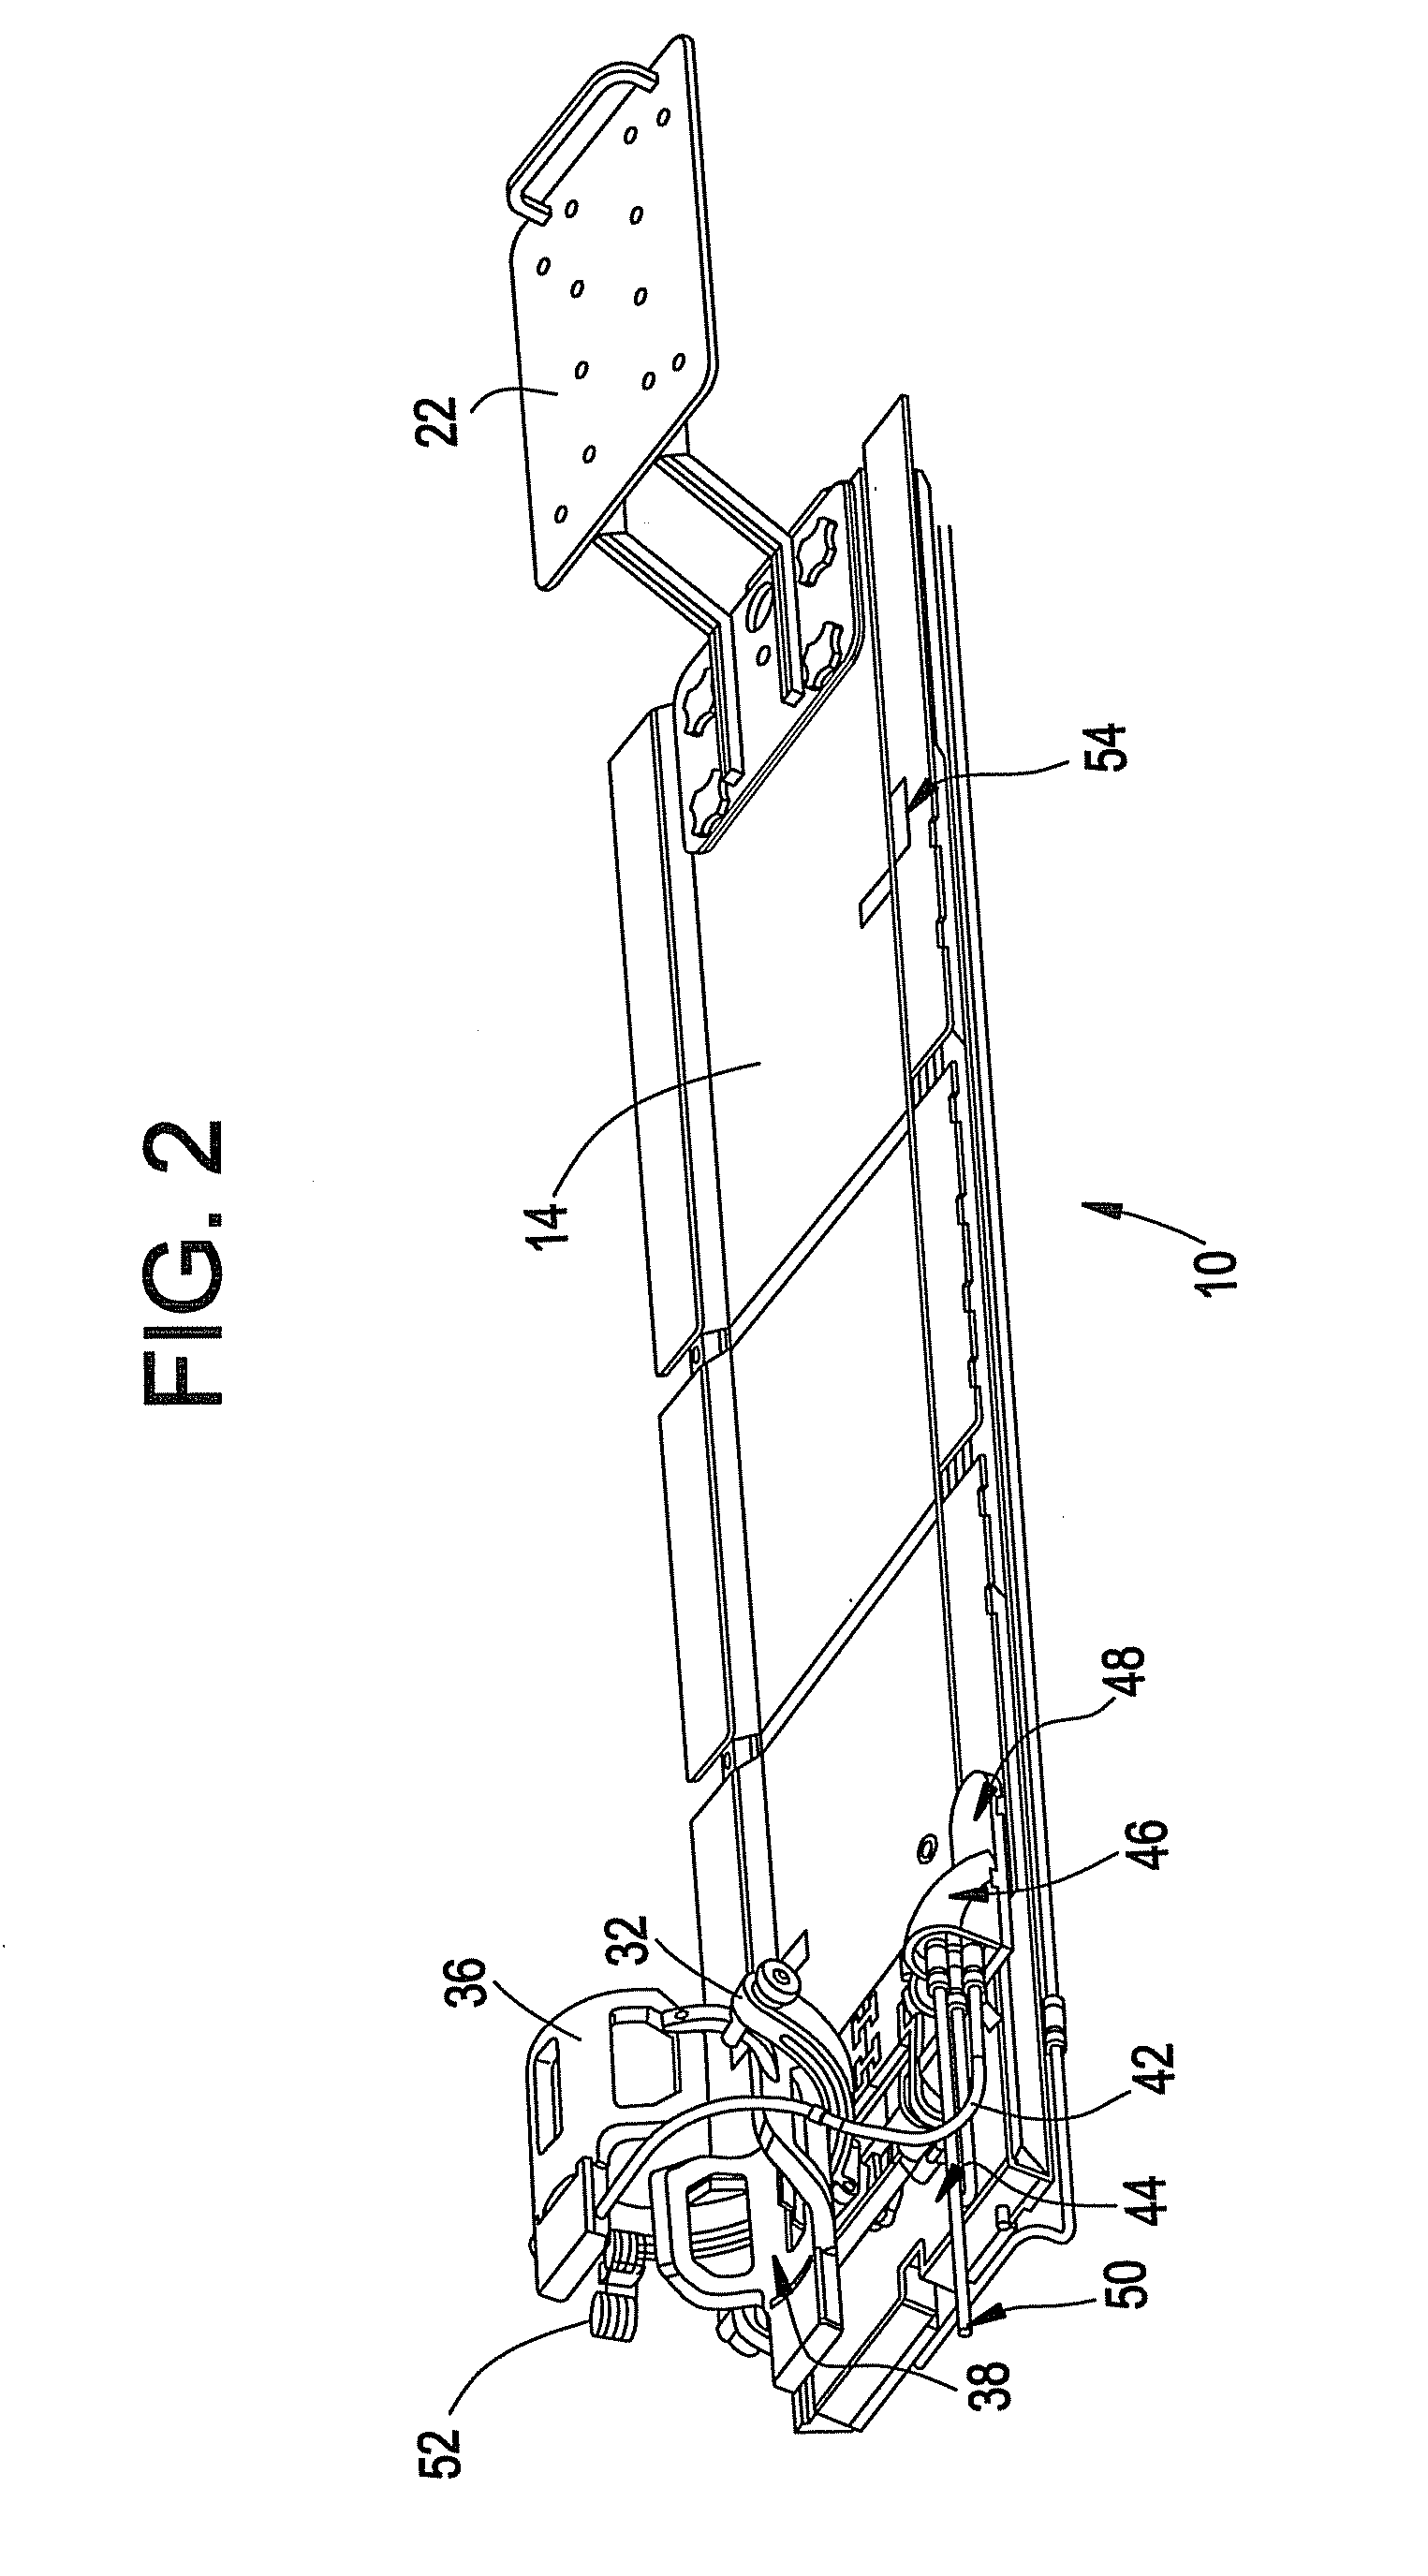 Patient table system and apparatus